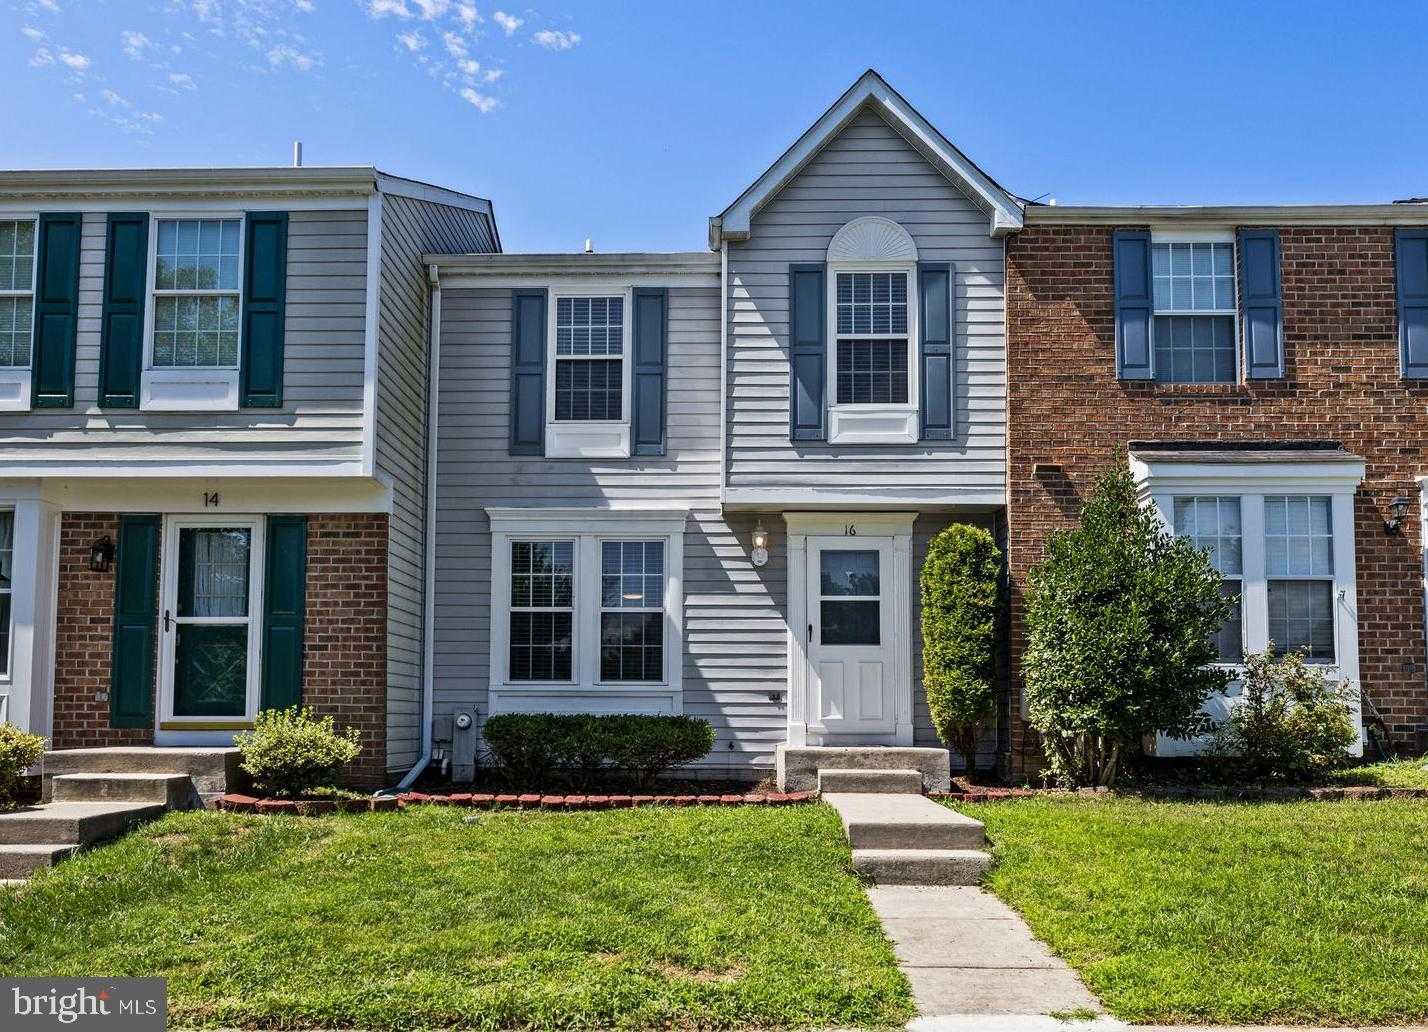 View NOTTINGHAM, MD 21236 townhome